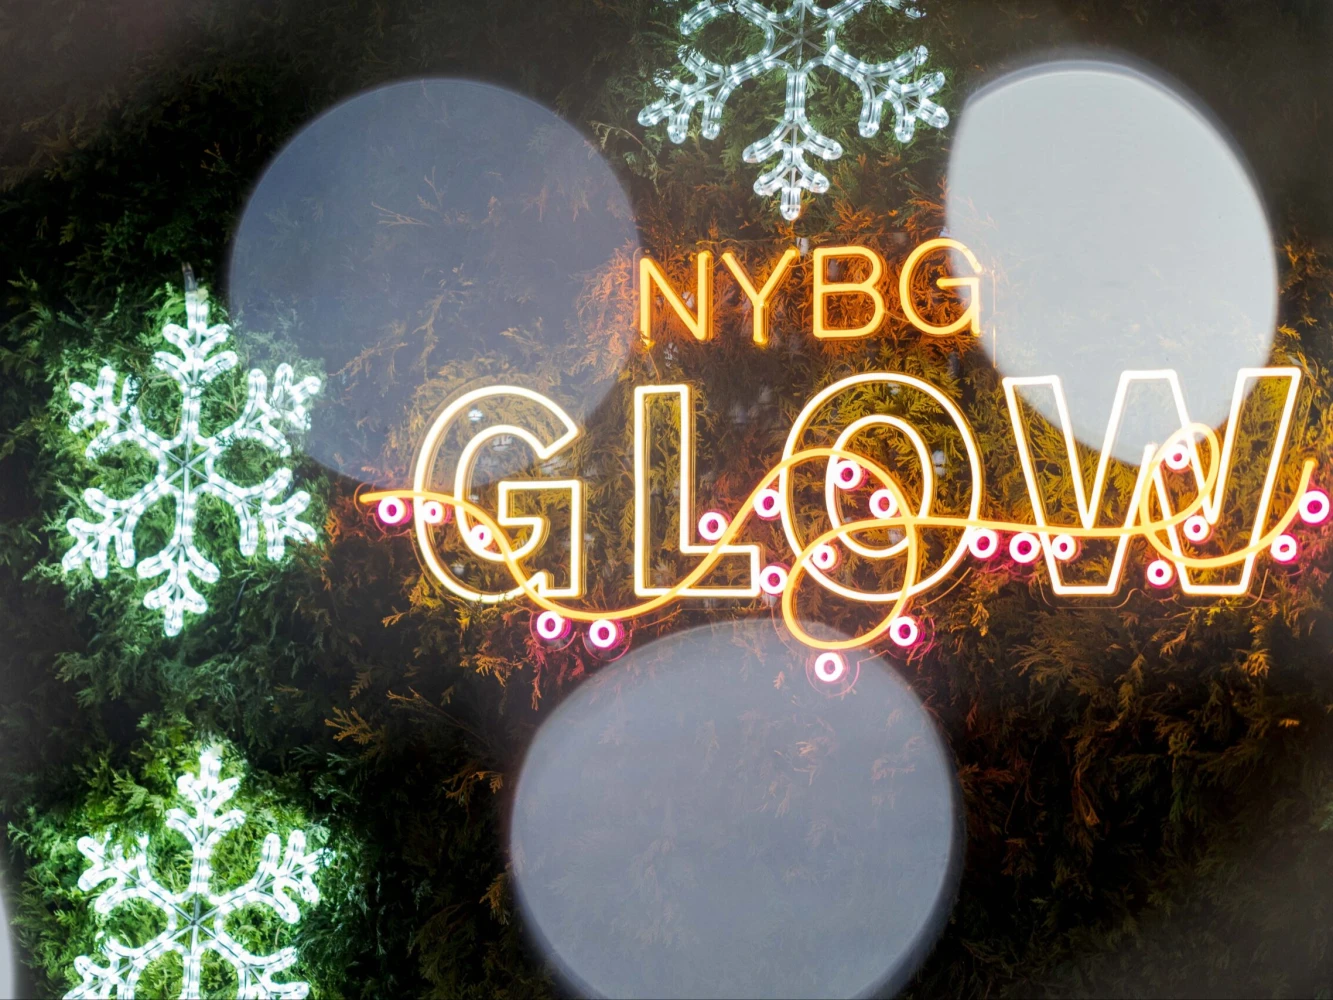 NYBG GLOW: An Outdoor Color & Light Experience: What to expect - 6